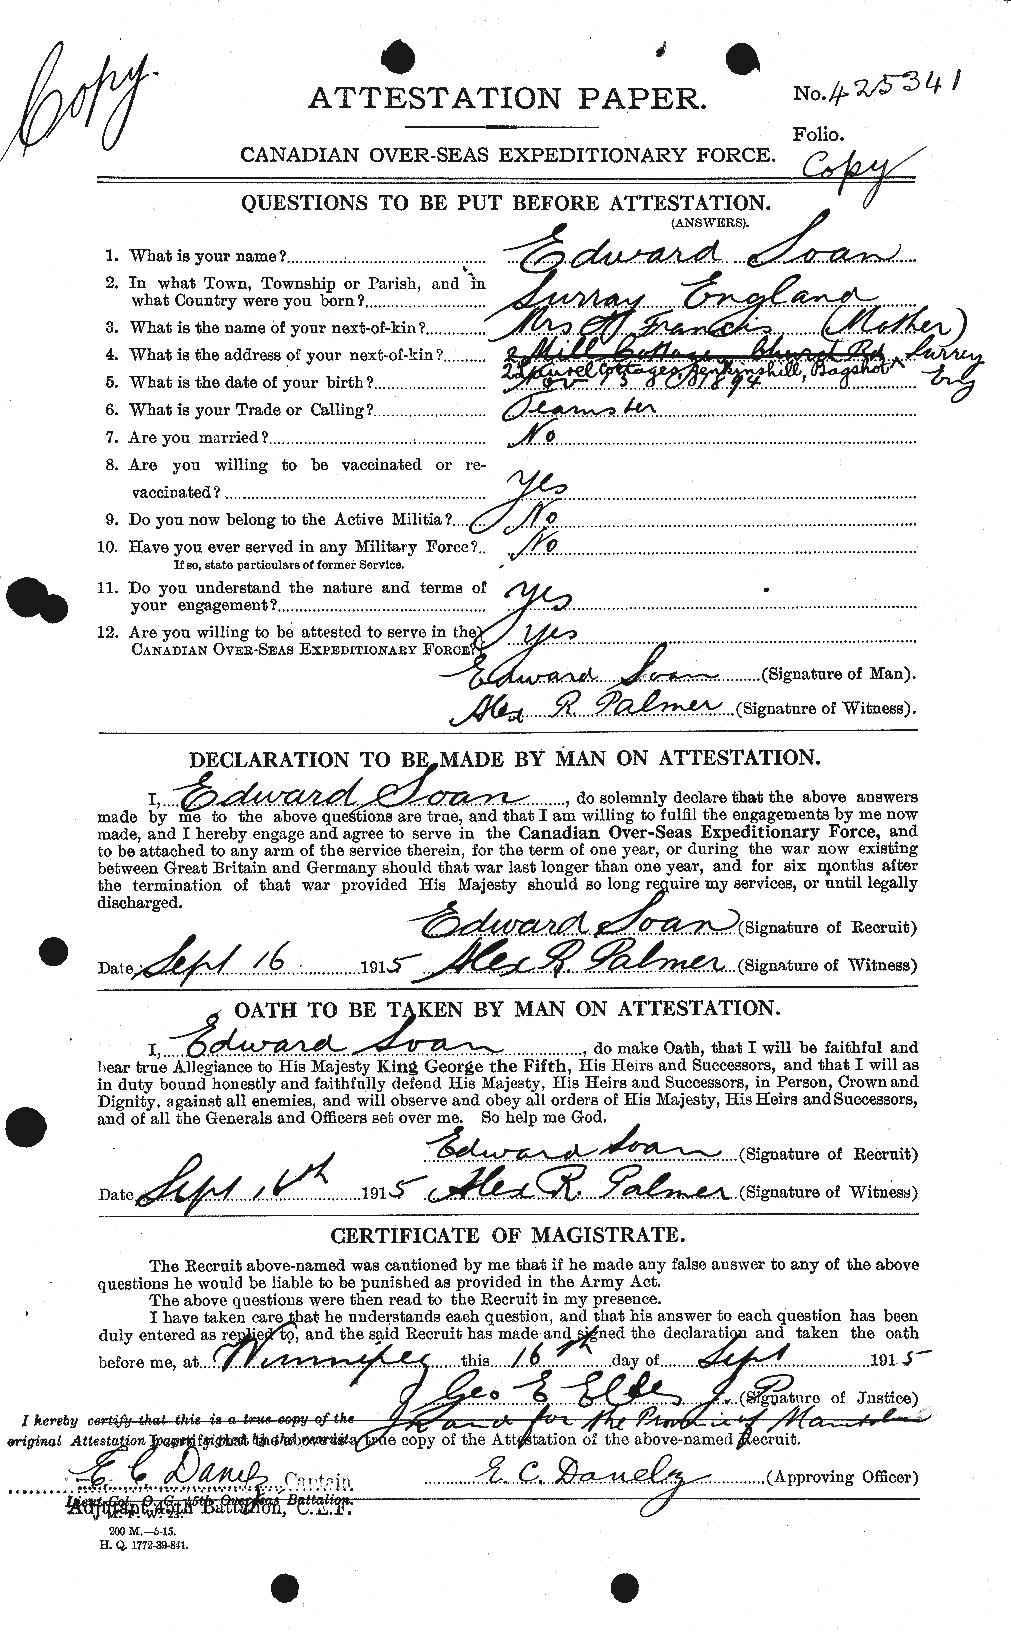 Personnel Records of the First World War - CEF 109039a